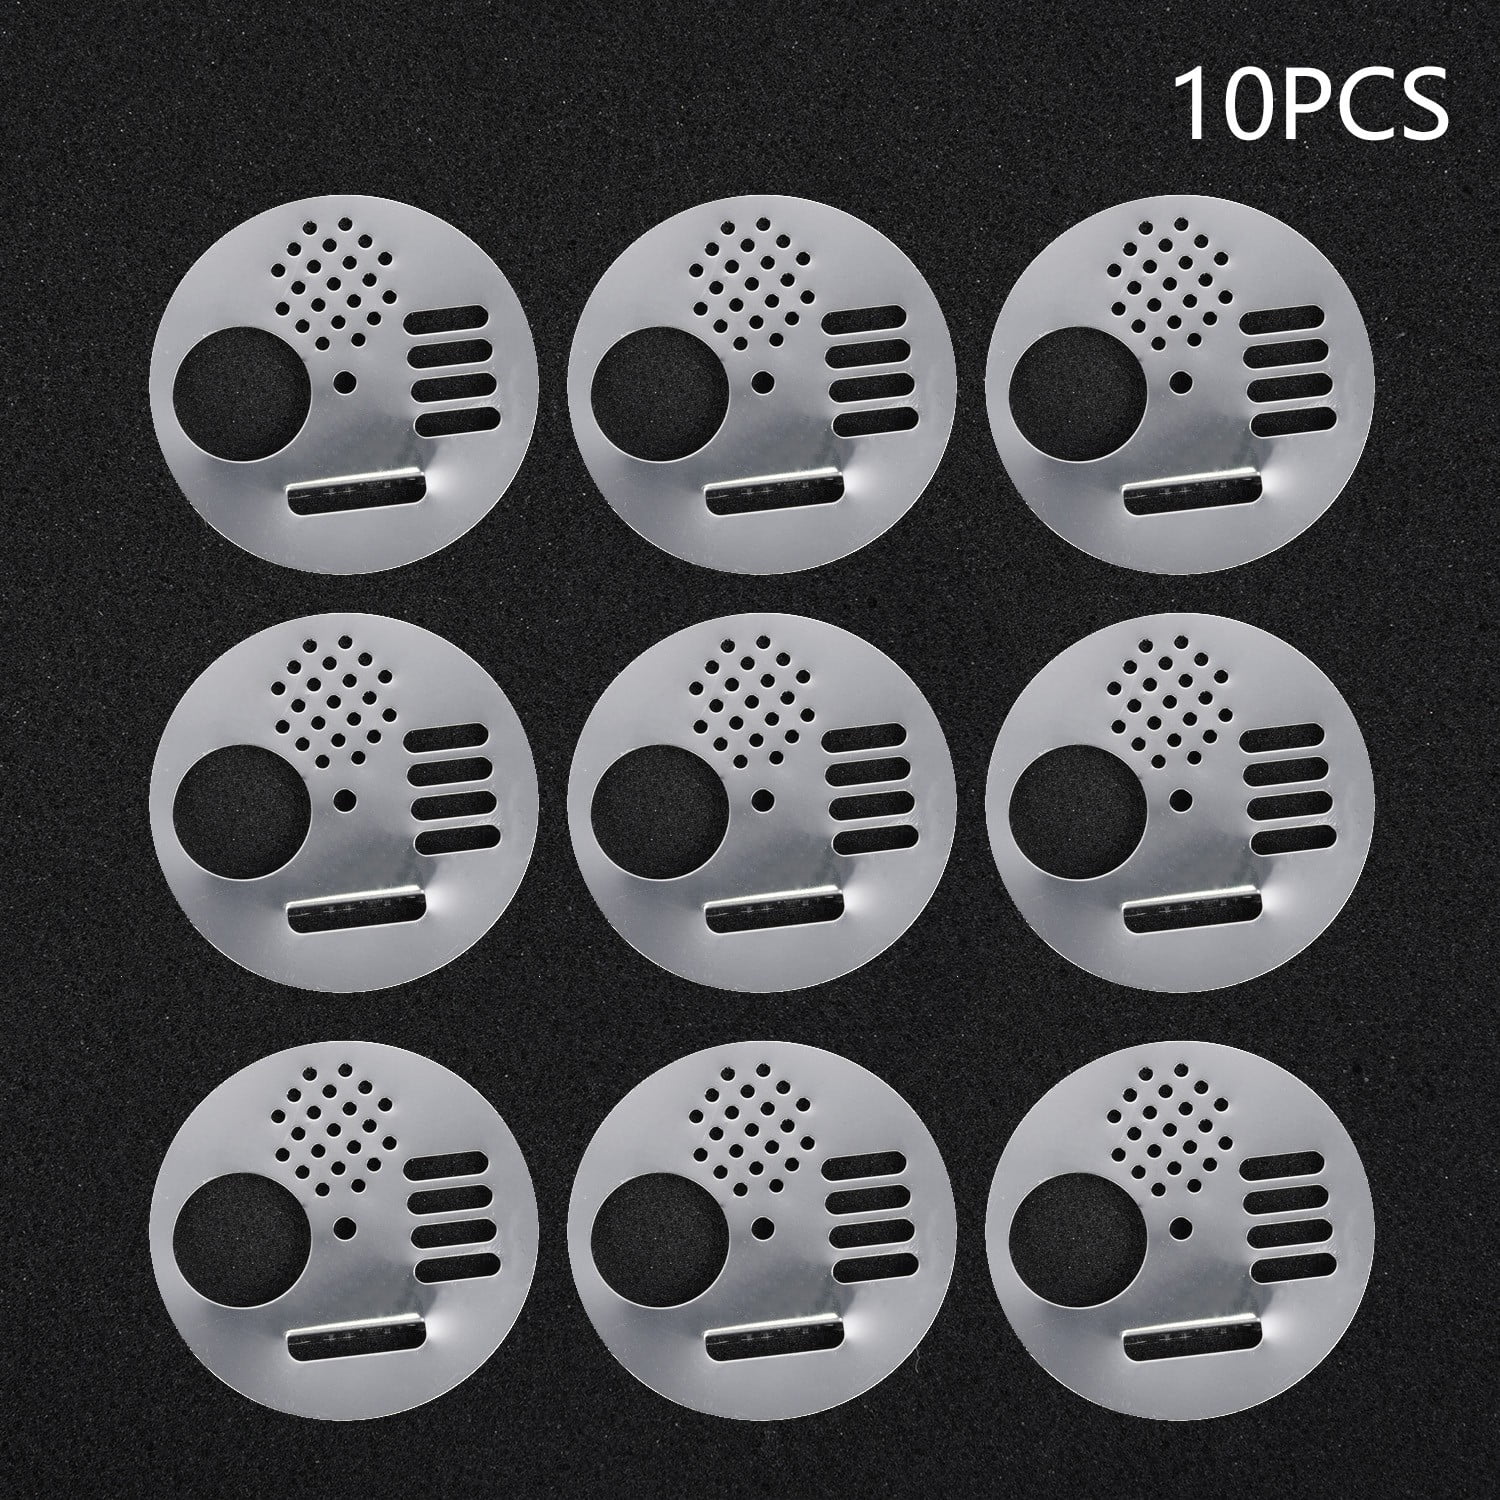 10pcs 6.8cm Silver Stainless Steel Bee Hive Box Gate Nest Entrance Disc Part Kit 